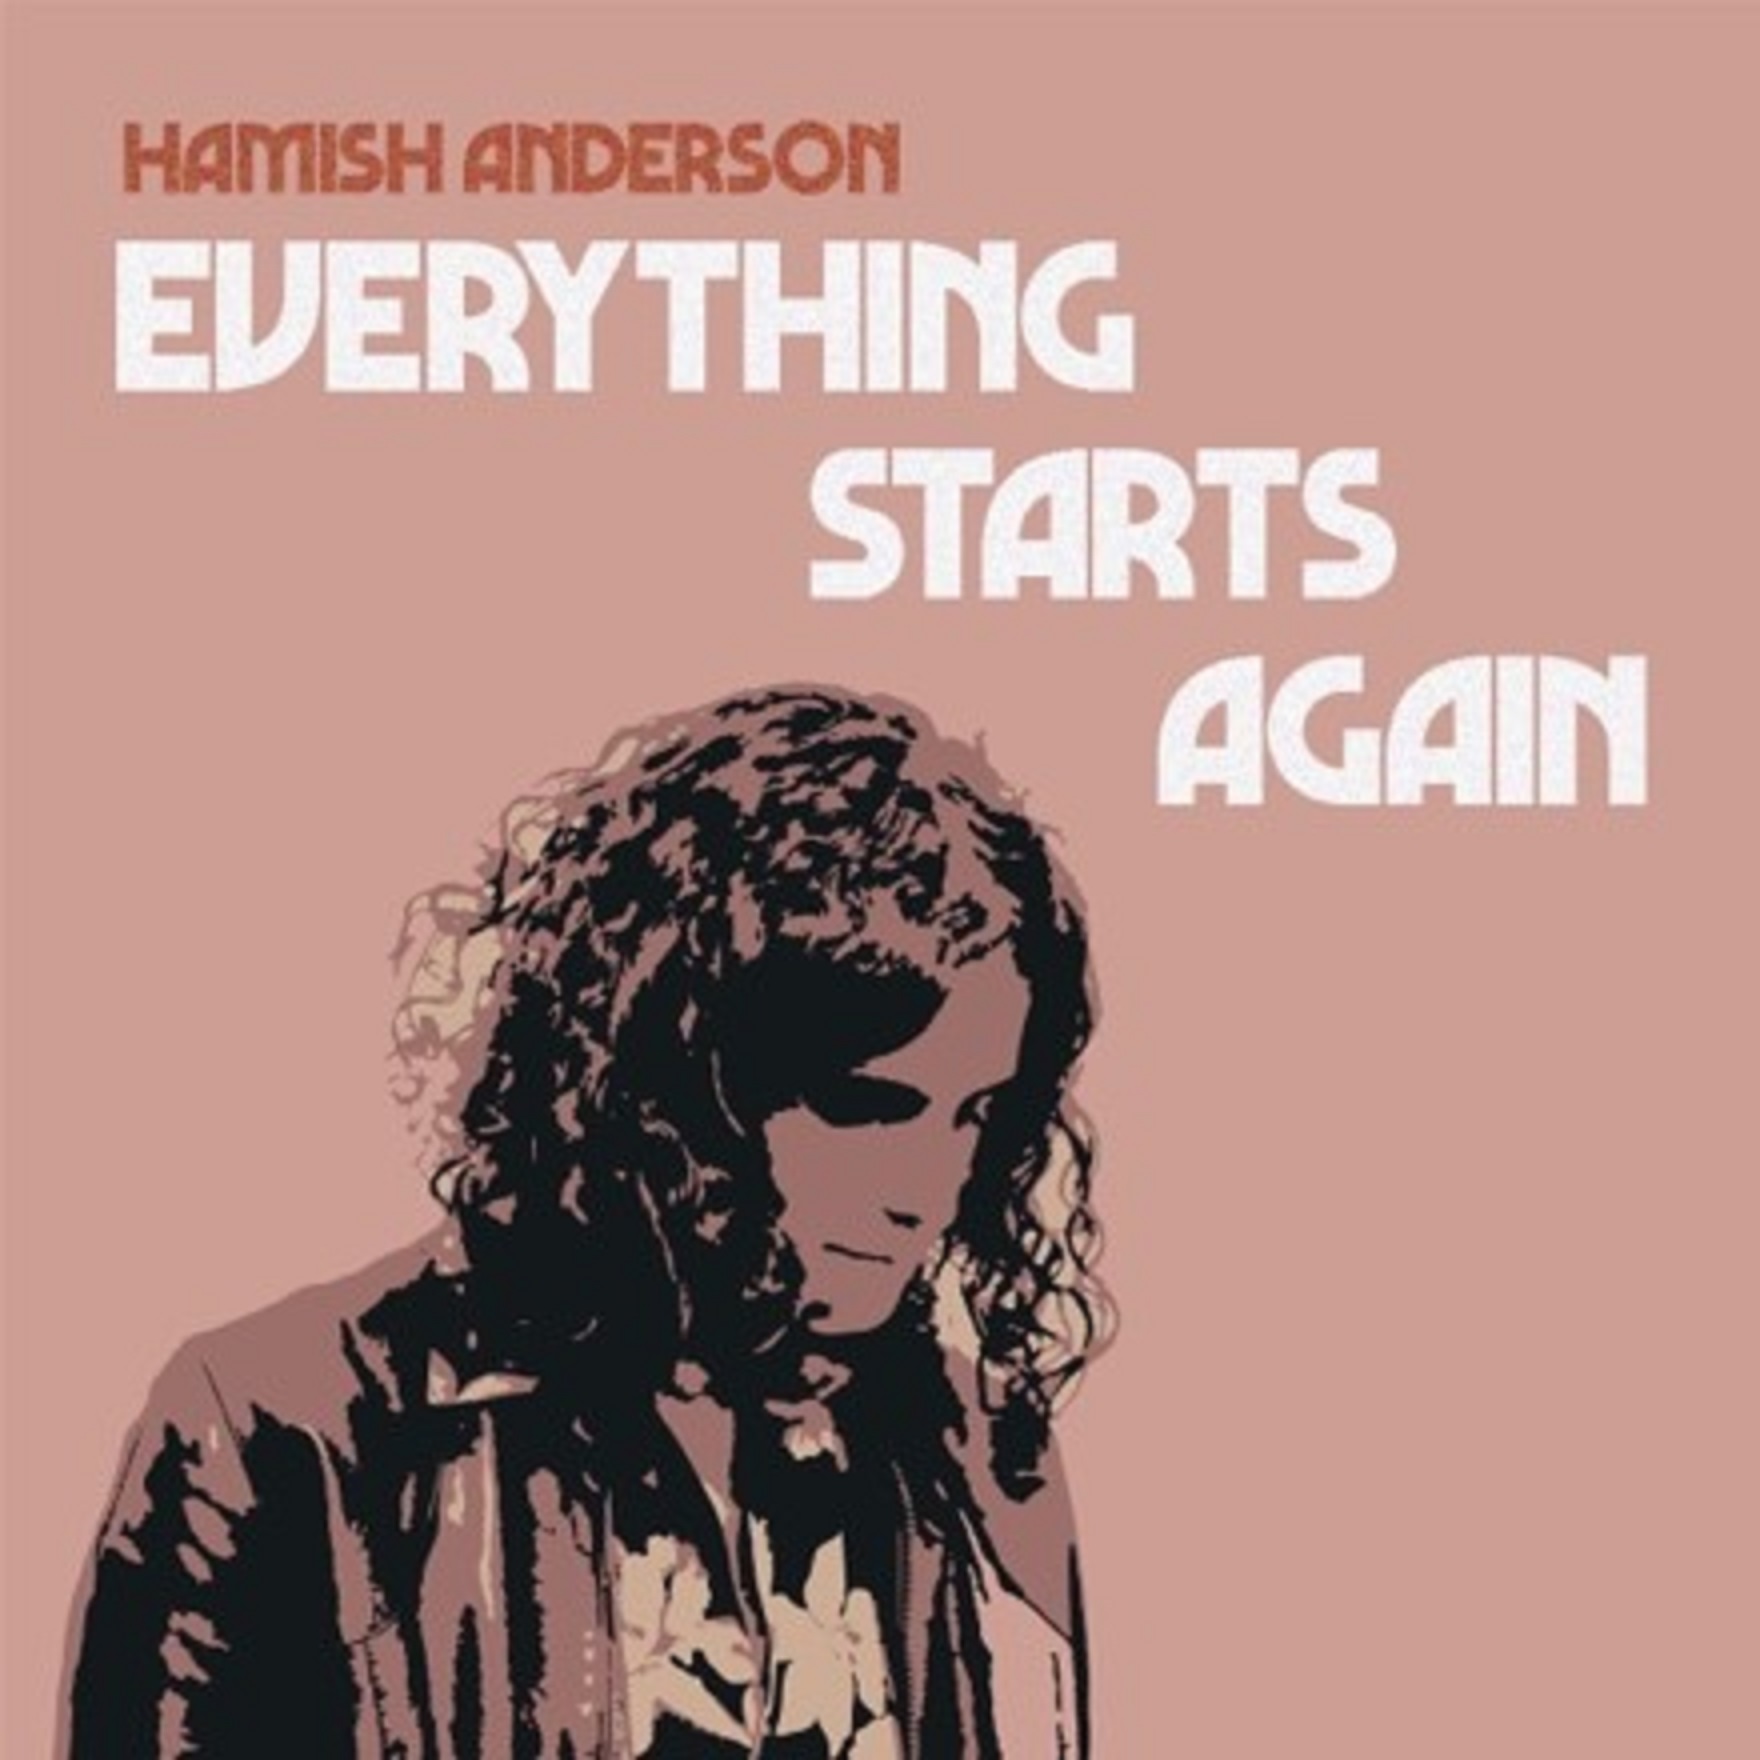 HAMISH ANDERSON DROPS NEW SINGLE “EVERYTHING STARTS AGAIN”